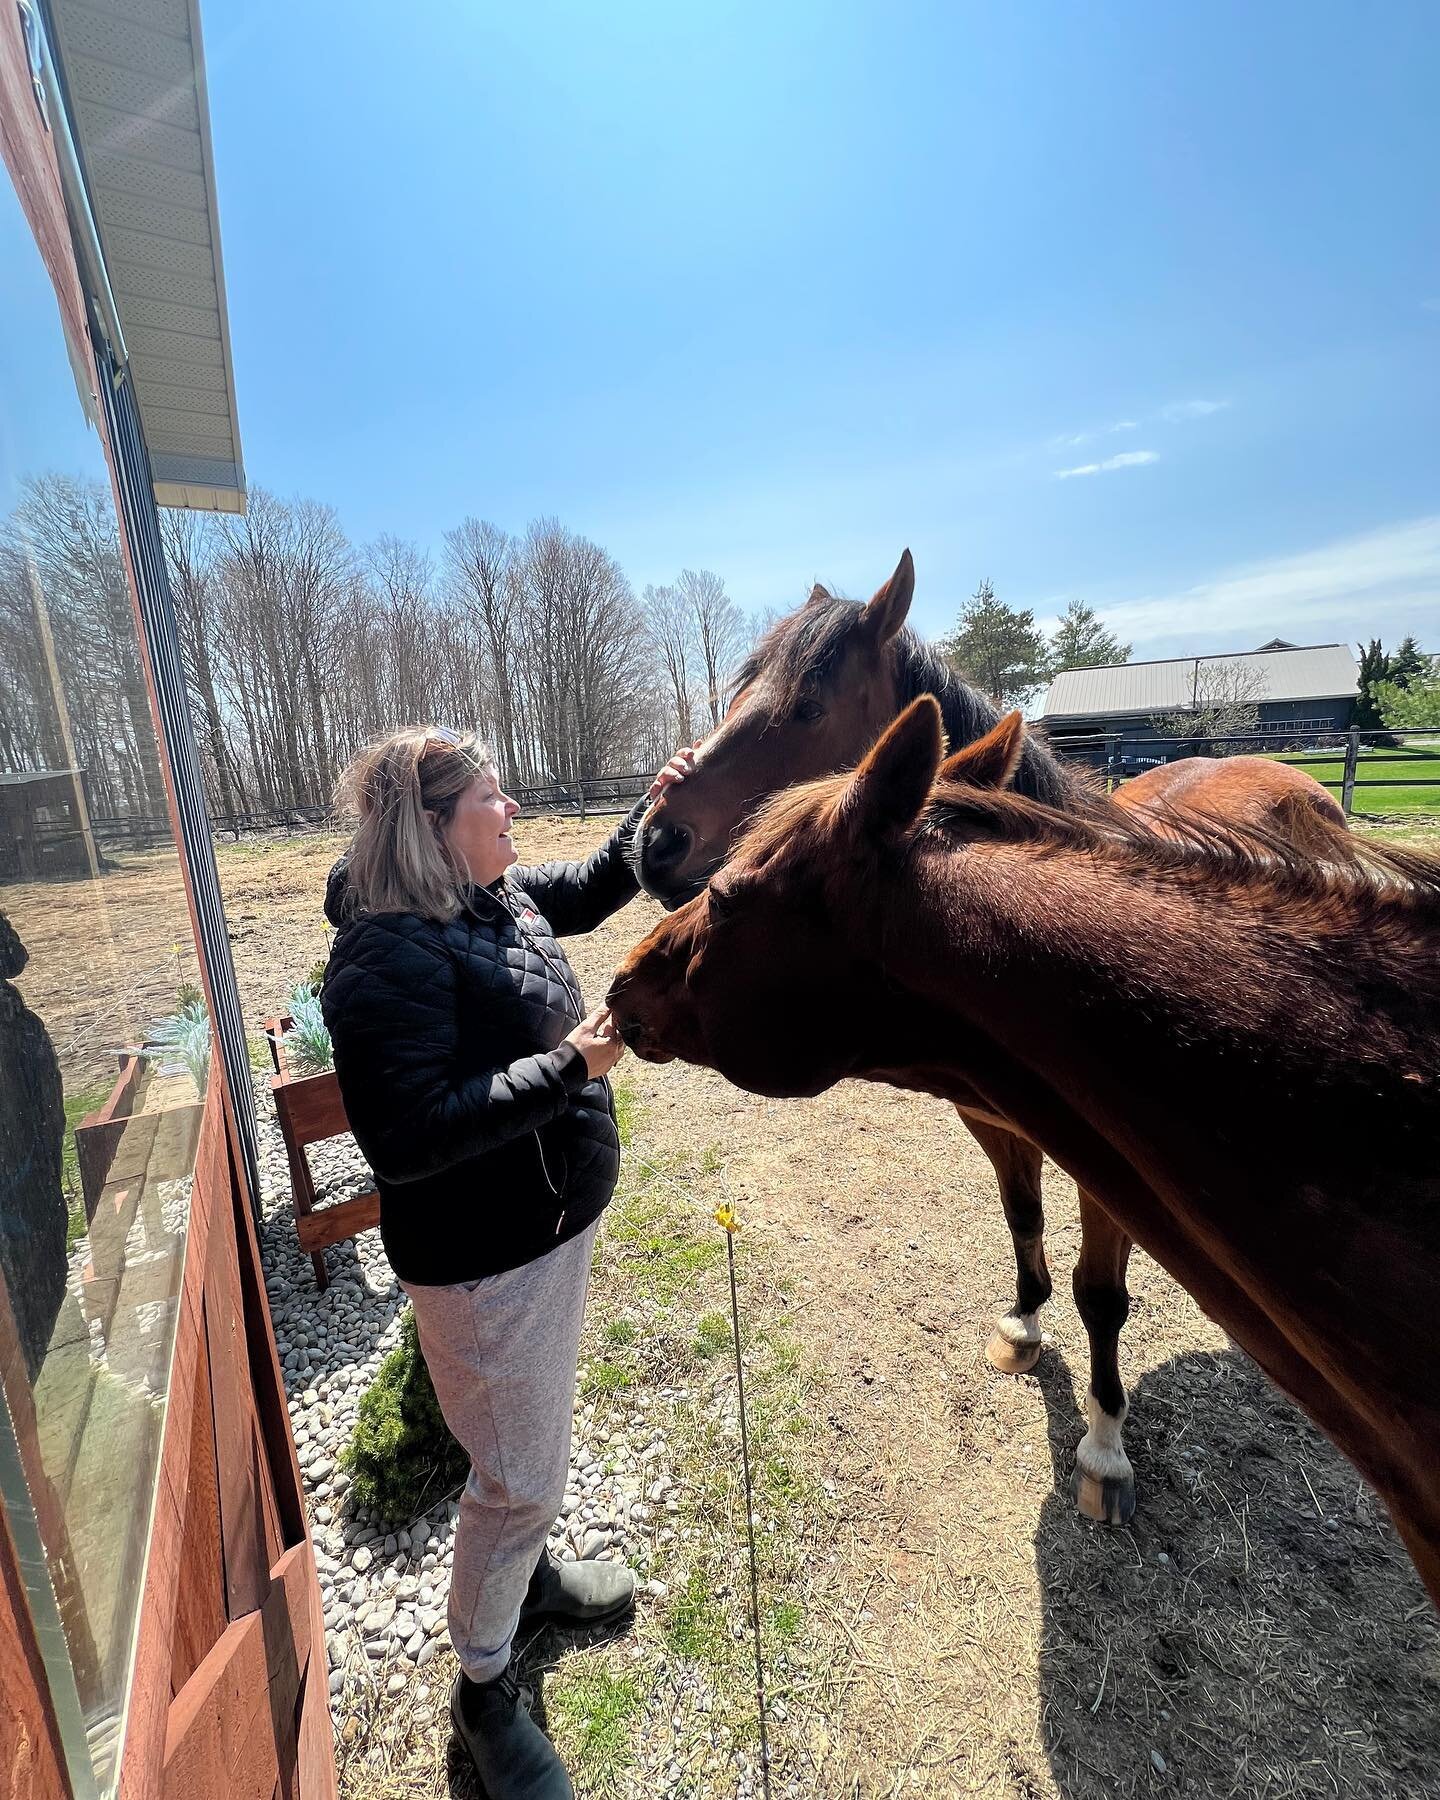 Sunshine and fresh air. I was very fortunate to spend some time at the barn today. Suess and Twister were so excited to get some treats from me along with some cuddles and head rubs

@baileybevan so great to just relax and chat and soak up all the vi